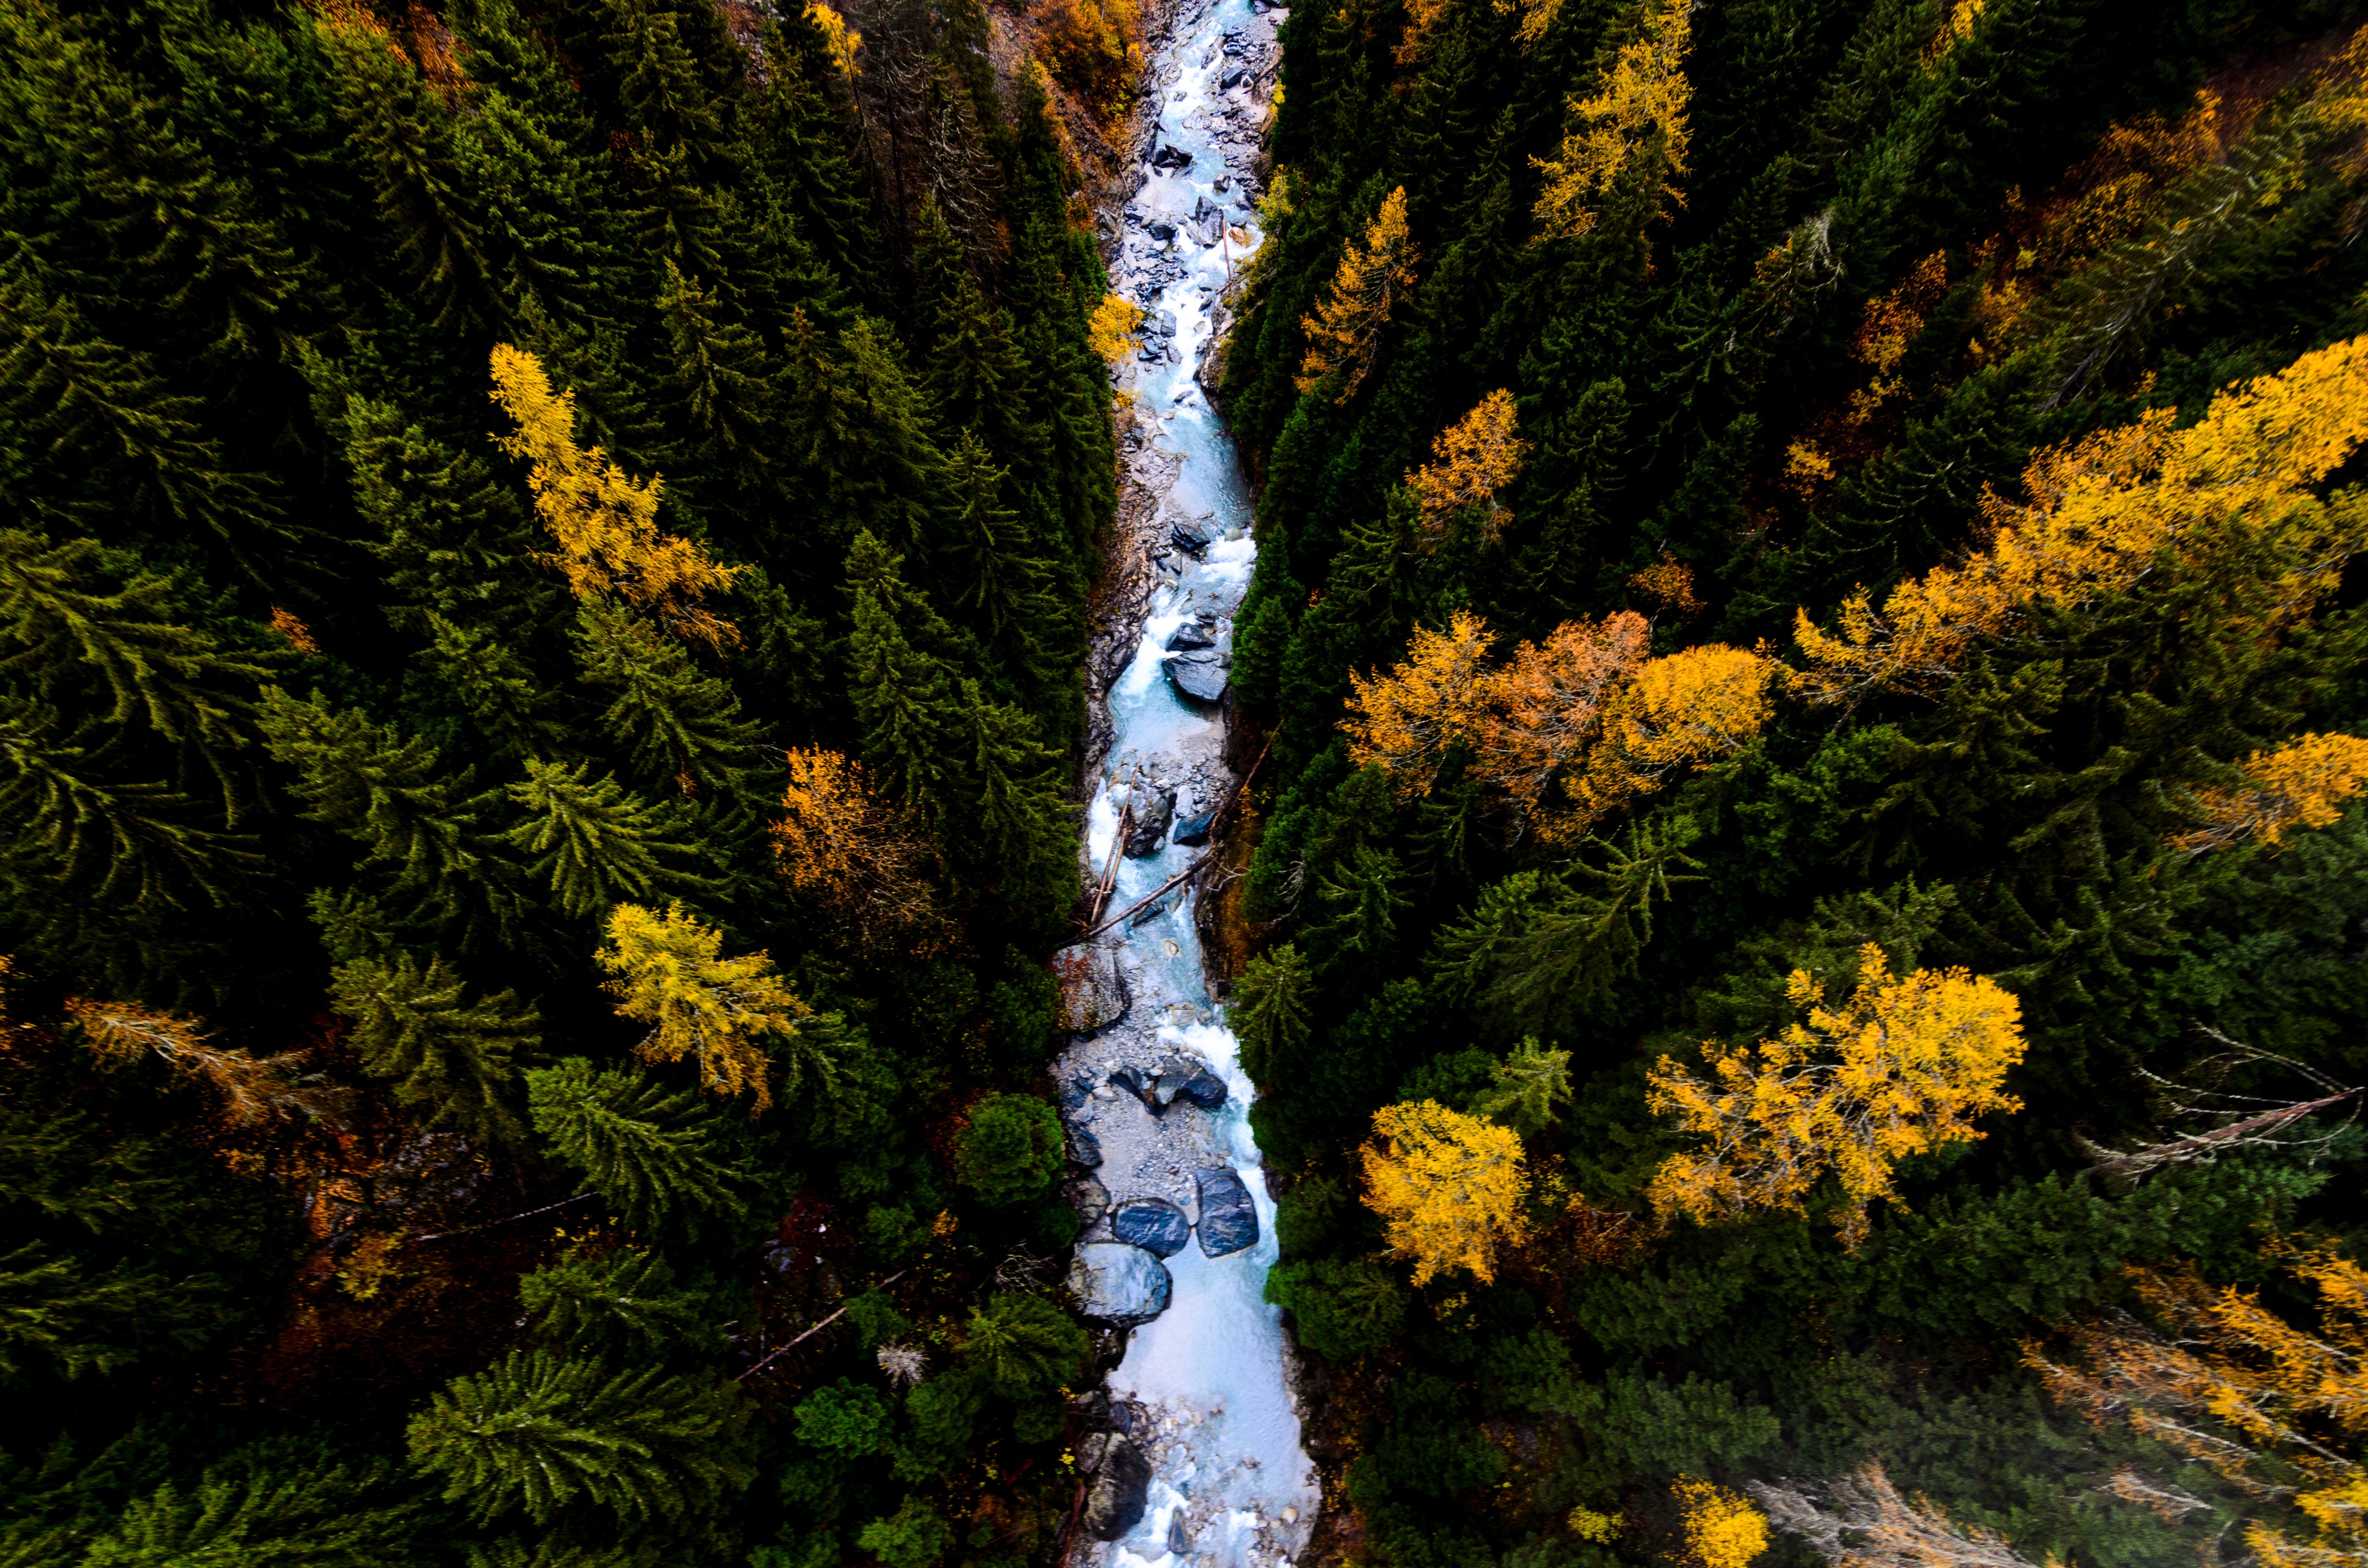 General 4928x3264 landscape forest river aerial view